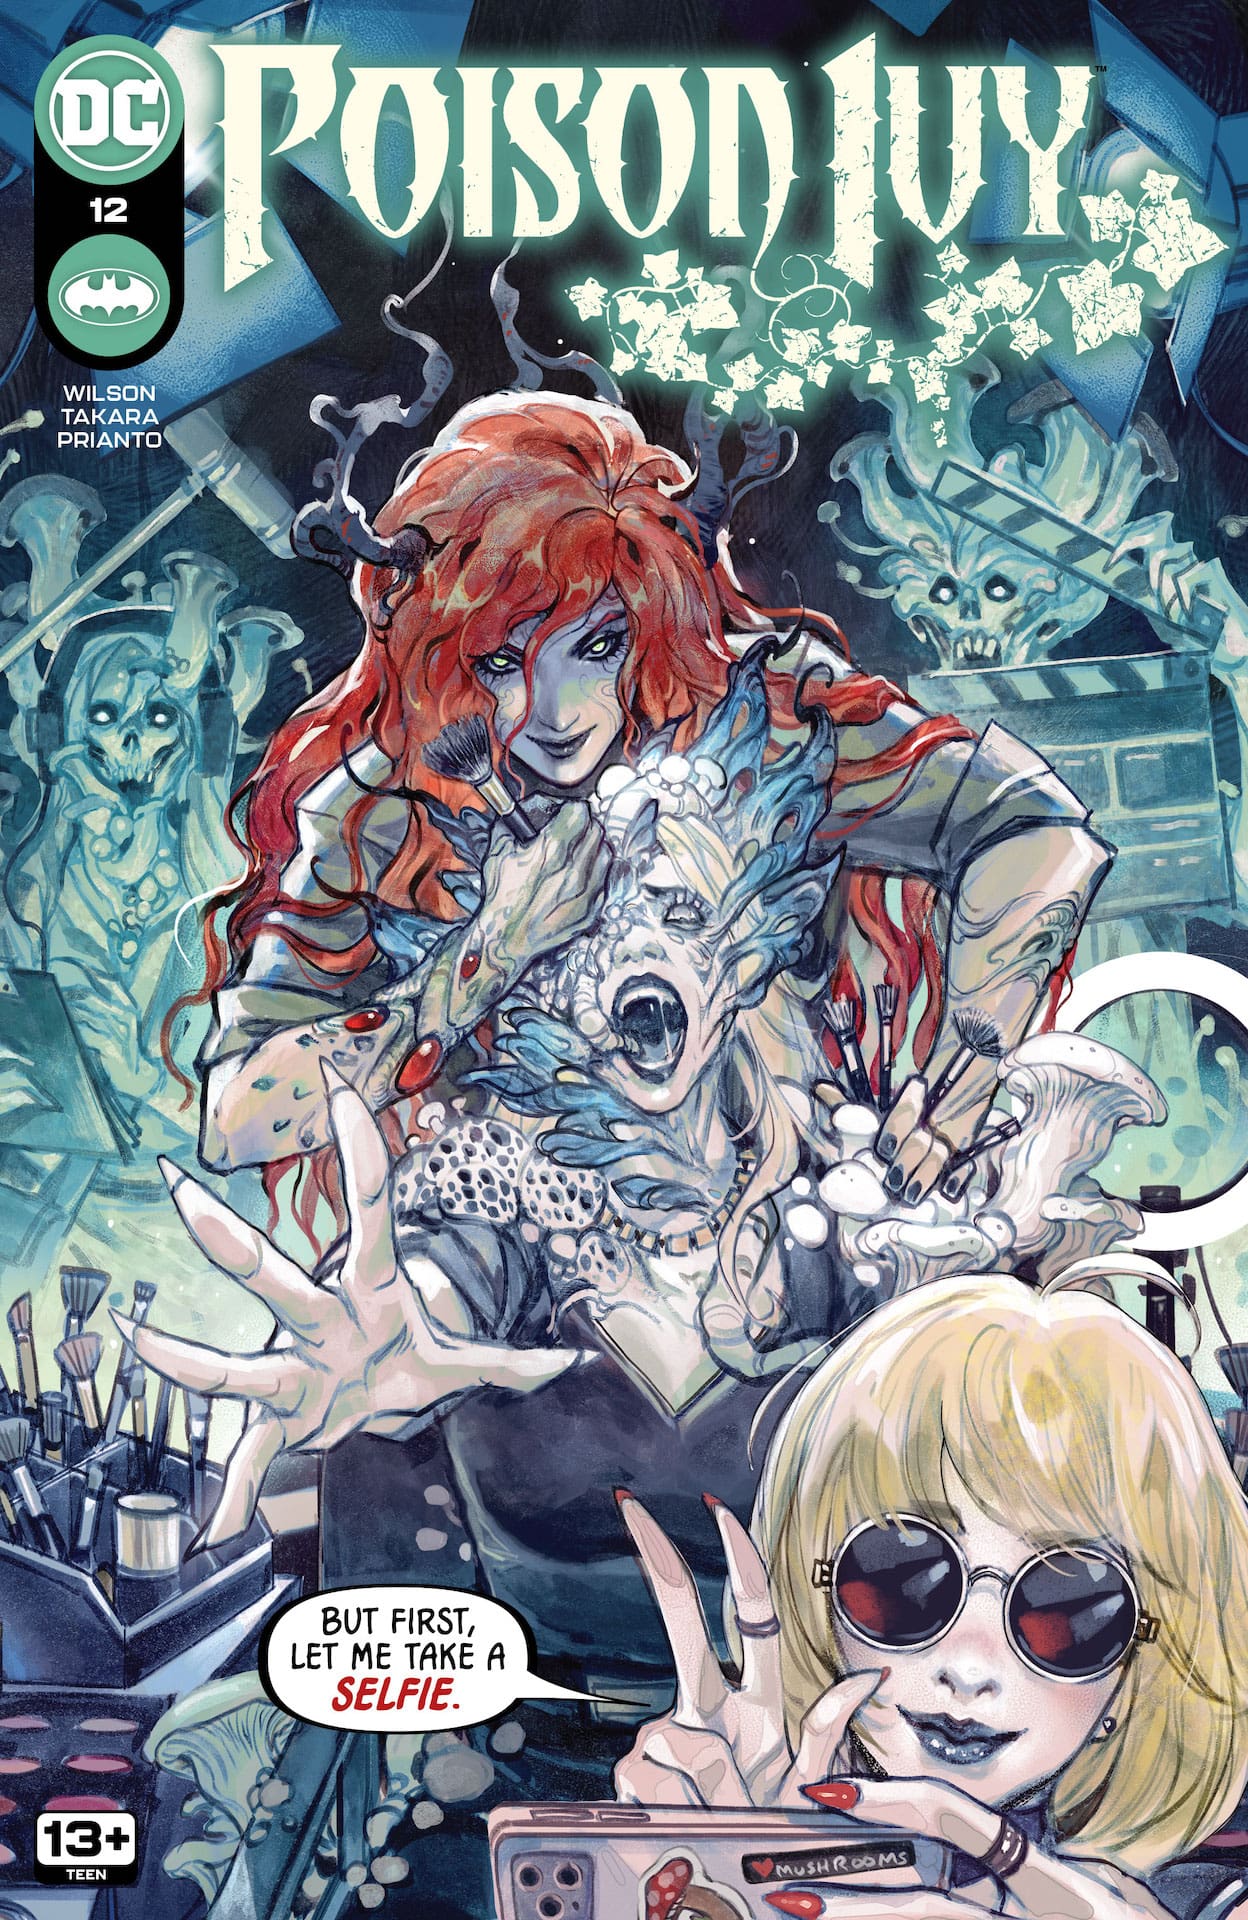 DC Preview: Poison Ivy #12